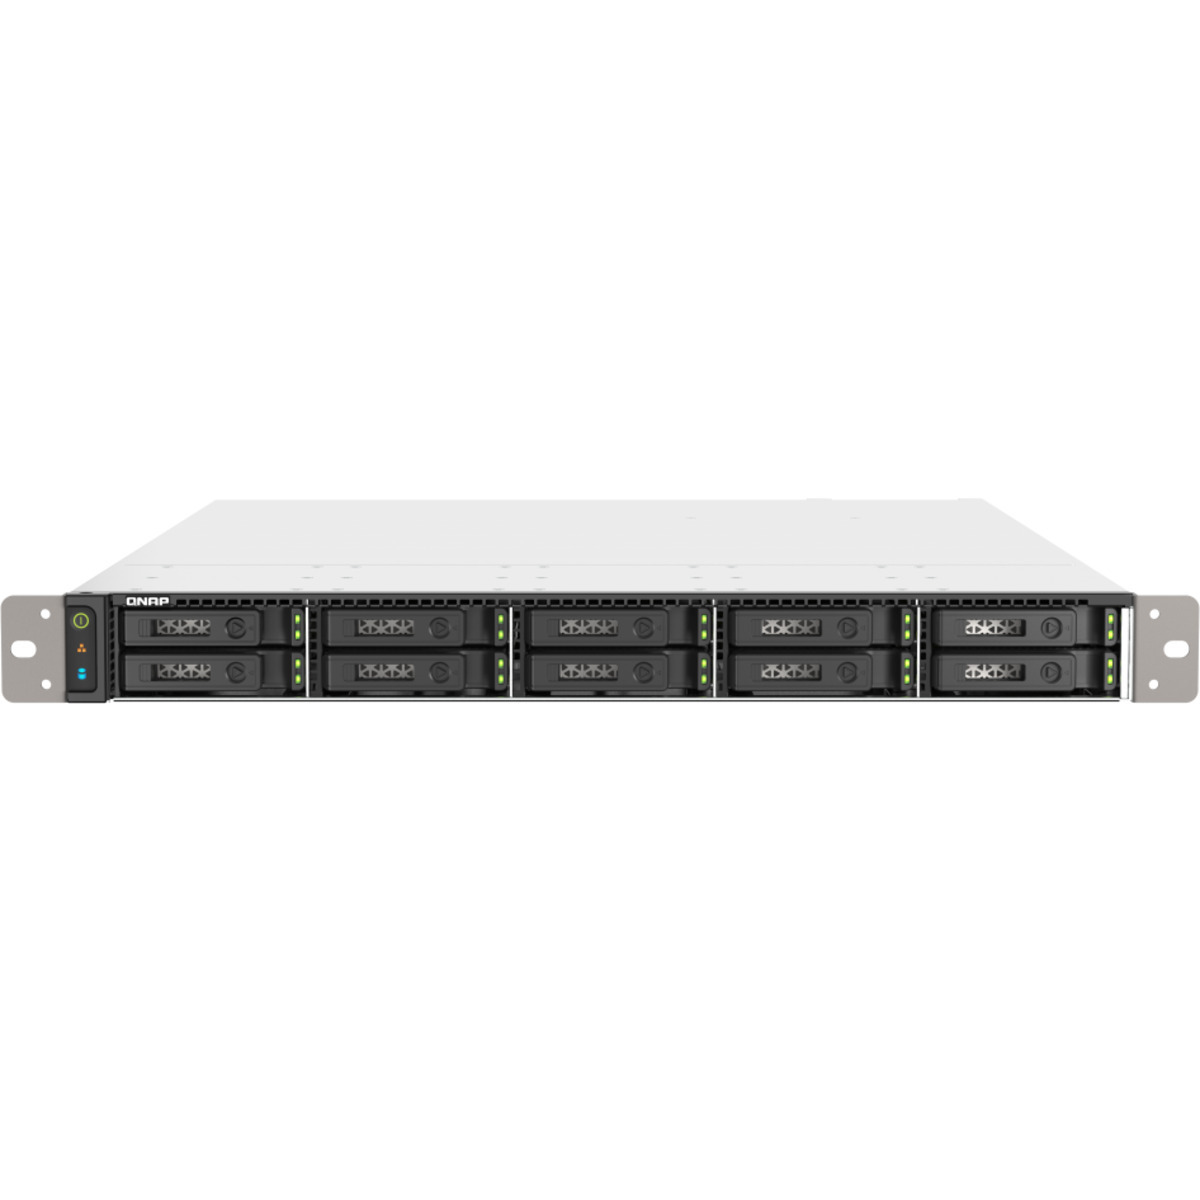 QNAP TS-h1090FU-7232P 8tb 10-Bay RackMount Large Business / Enterprise NAS - Network Attached Storage Device 8x1tb Samsung 990 PRO MZ-V9P1T0BW  7450/6900MB/s M.2 2280 NVMe SSD ENTERPRISE Class Drives Installed - Burn-In Tested TS-h1090FU-7232P